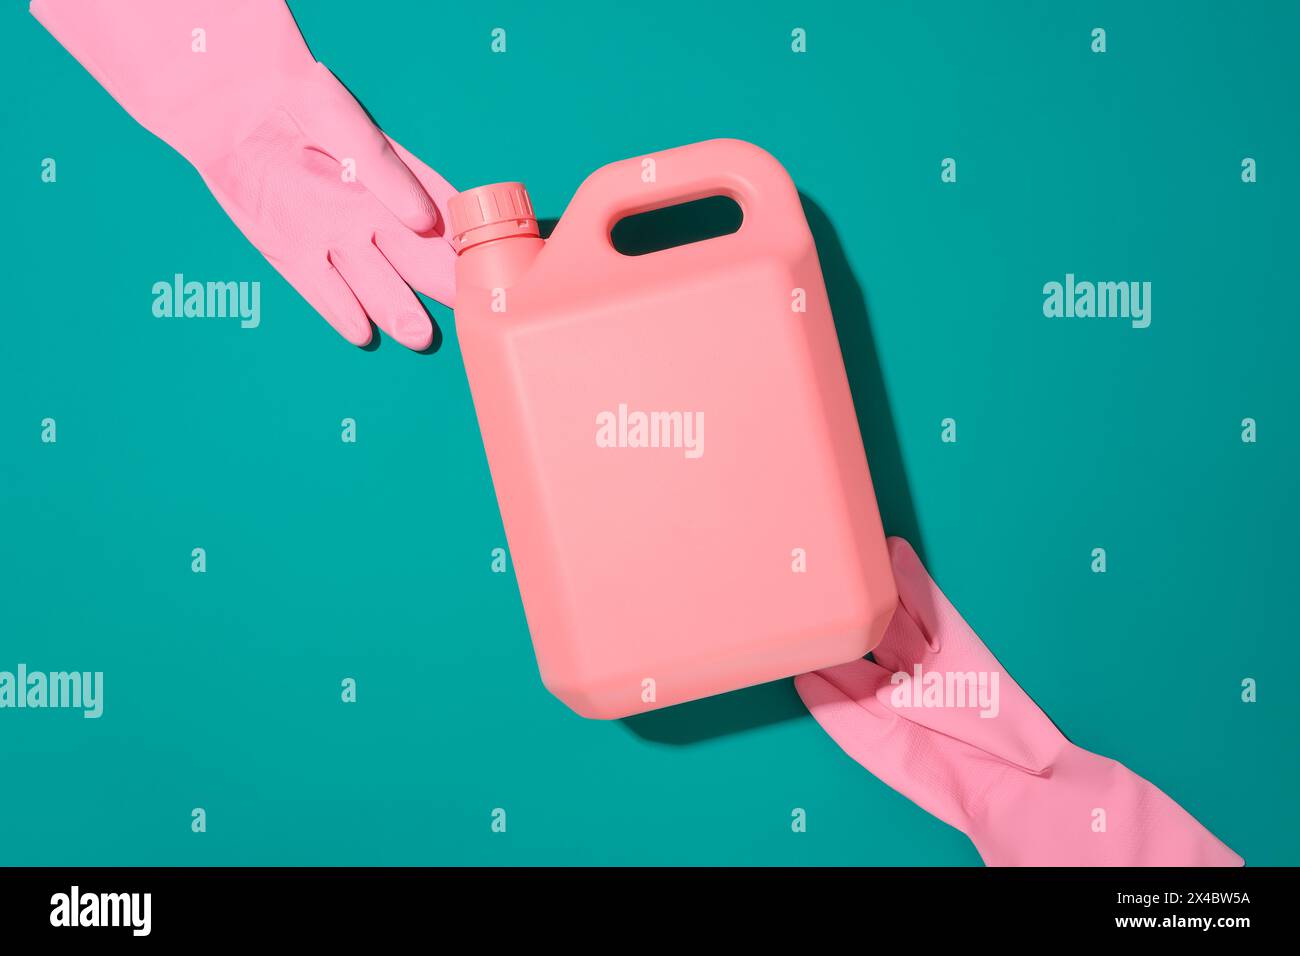 An unlabeled bottle of detergent and a pair of rubber gloves on a turquoise background. Mockup of cleaning products for advertising. Top view. Stock Photo